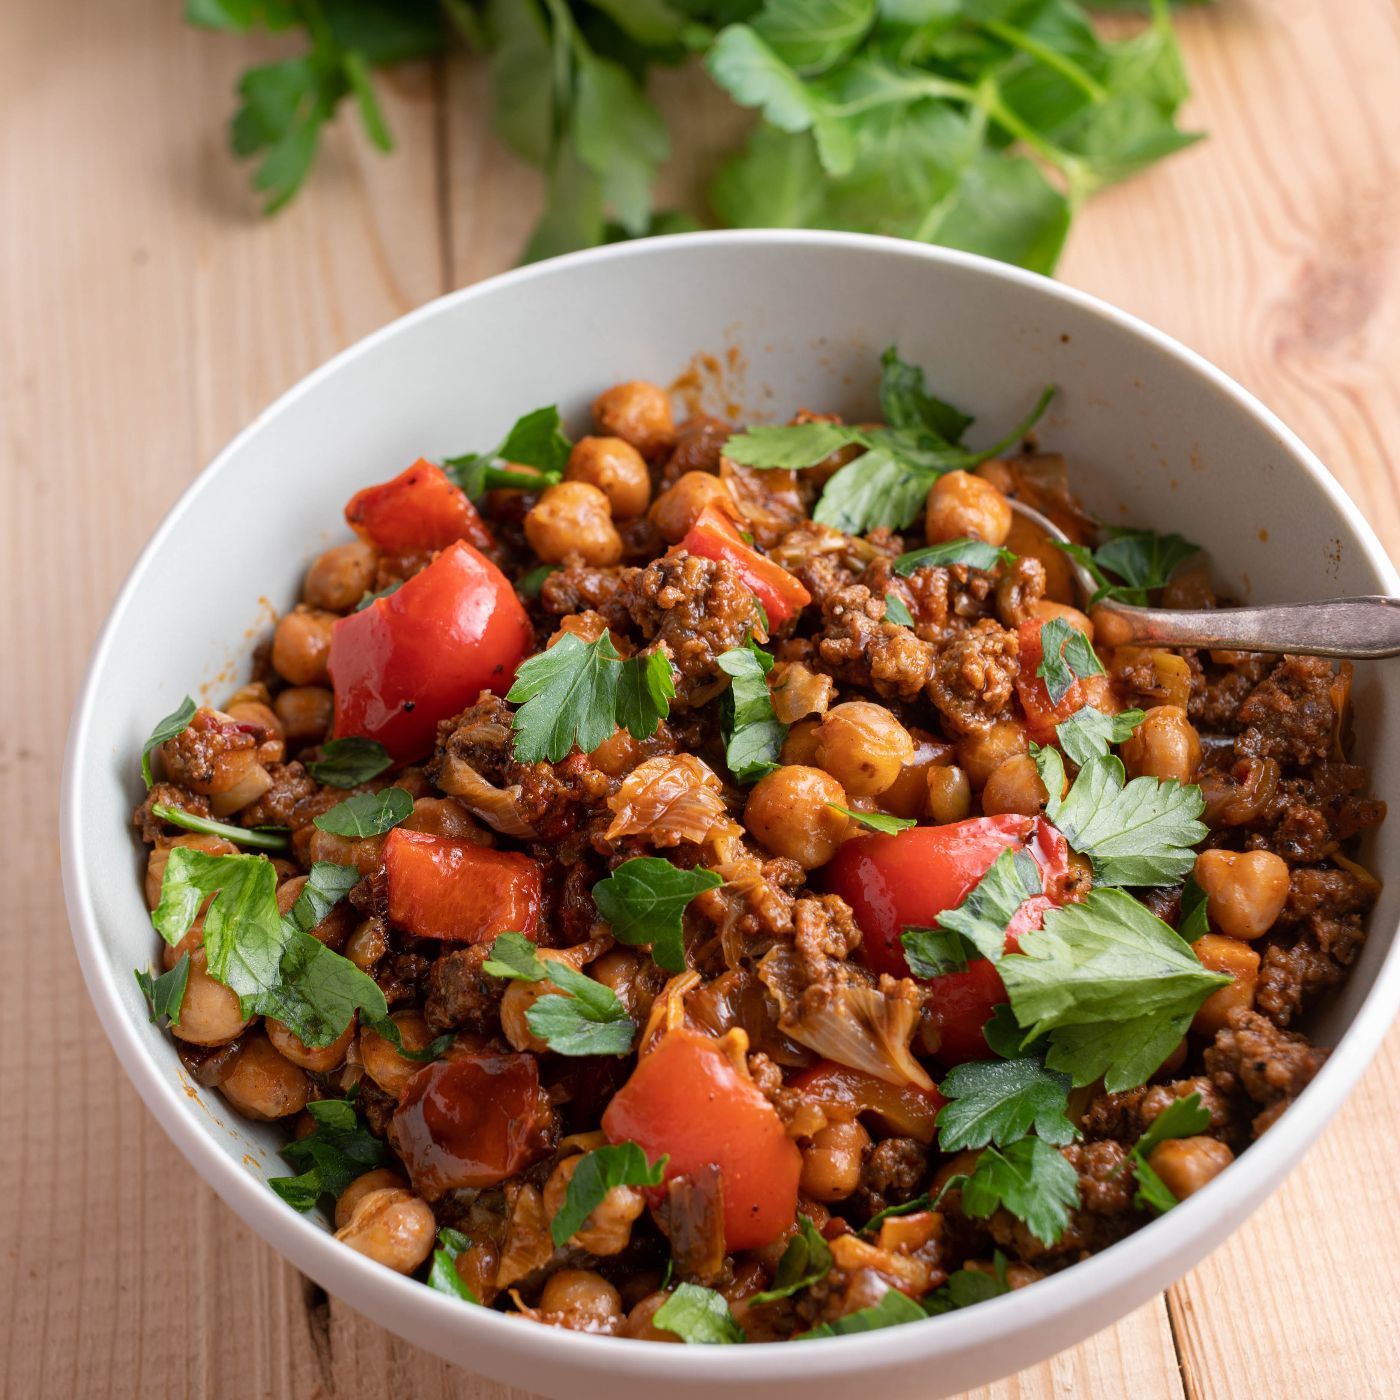 Ground-beef-with-chick-peas-and-vegetable-in-a-bowl-1368547679_5286x3732 square.jpeg